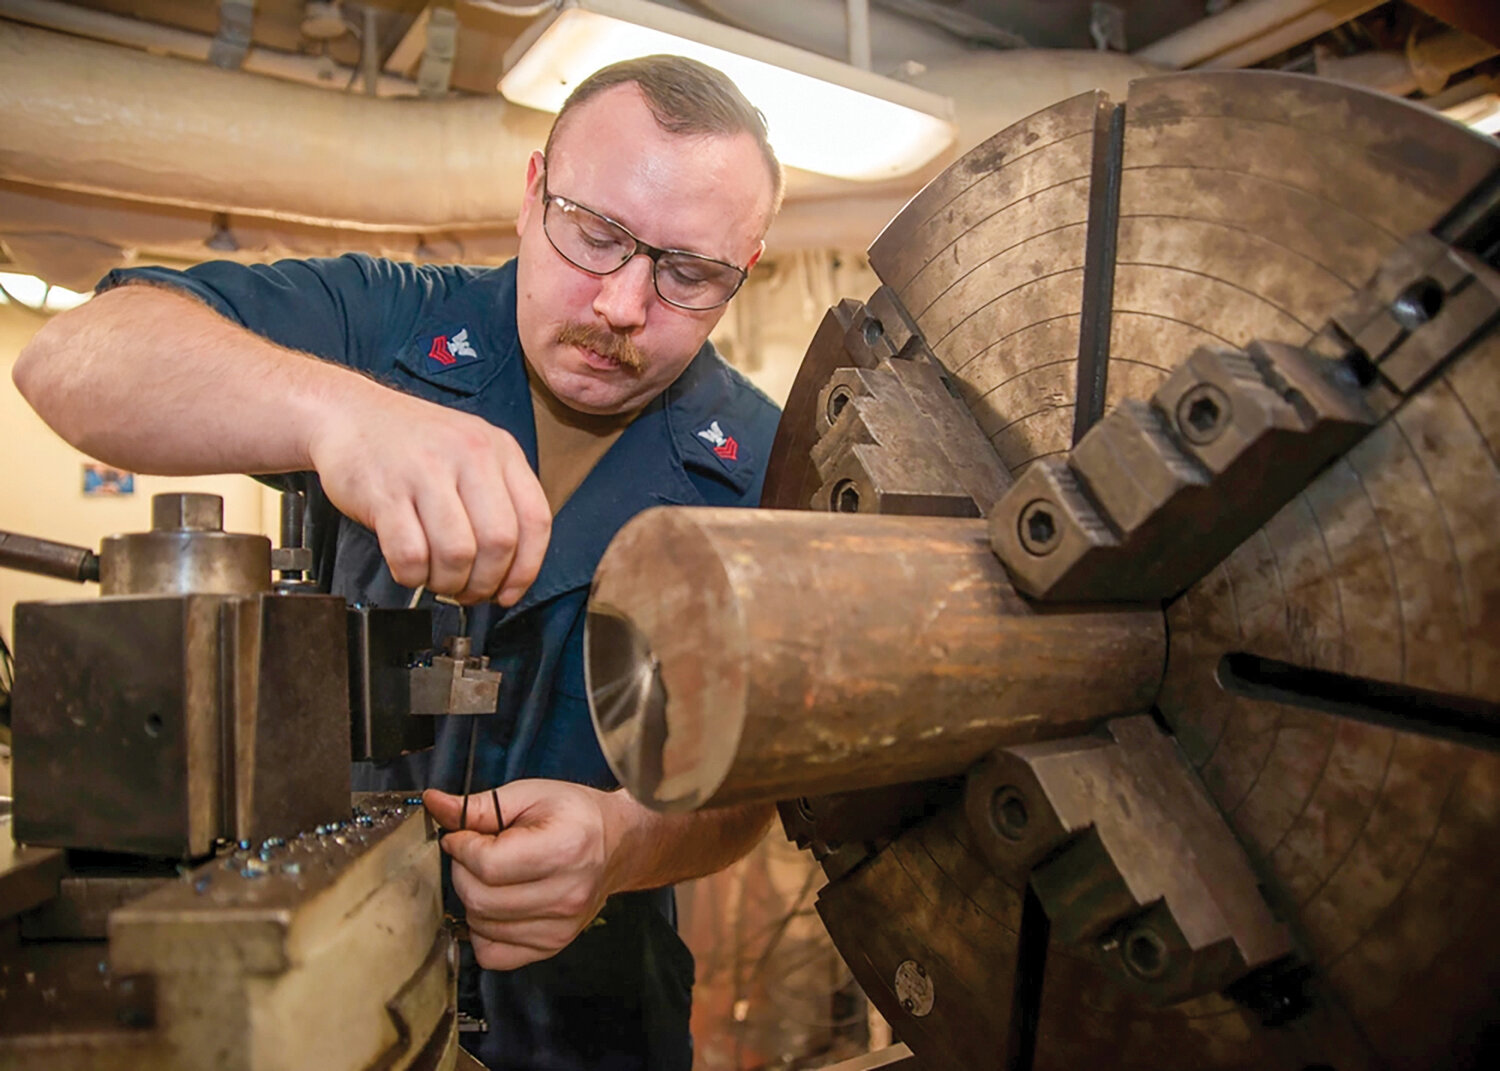 U.S. Navy Machinery Repairman 1st Class Walter Hurt, from Amboy, prepares to machine metal stock using a lathe in the machinery repair shop aboard the aircraft carrier USS Nimitz (CVN 68) while underway in the Pacific Ocean, Nov. 7. Nimitz is underway conducting routine operations.